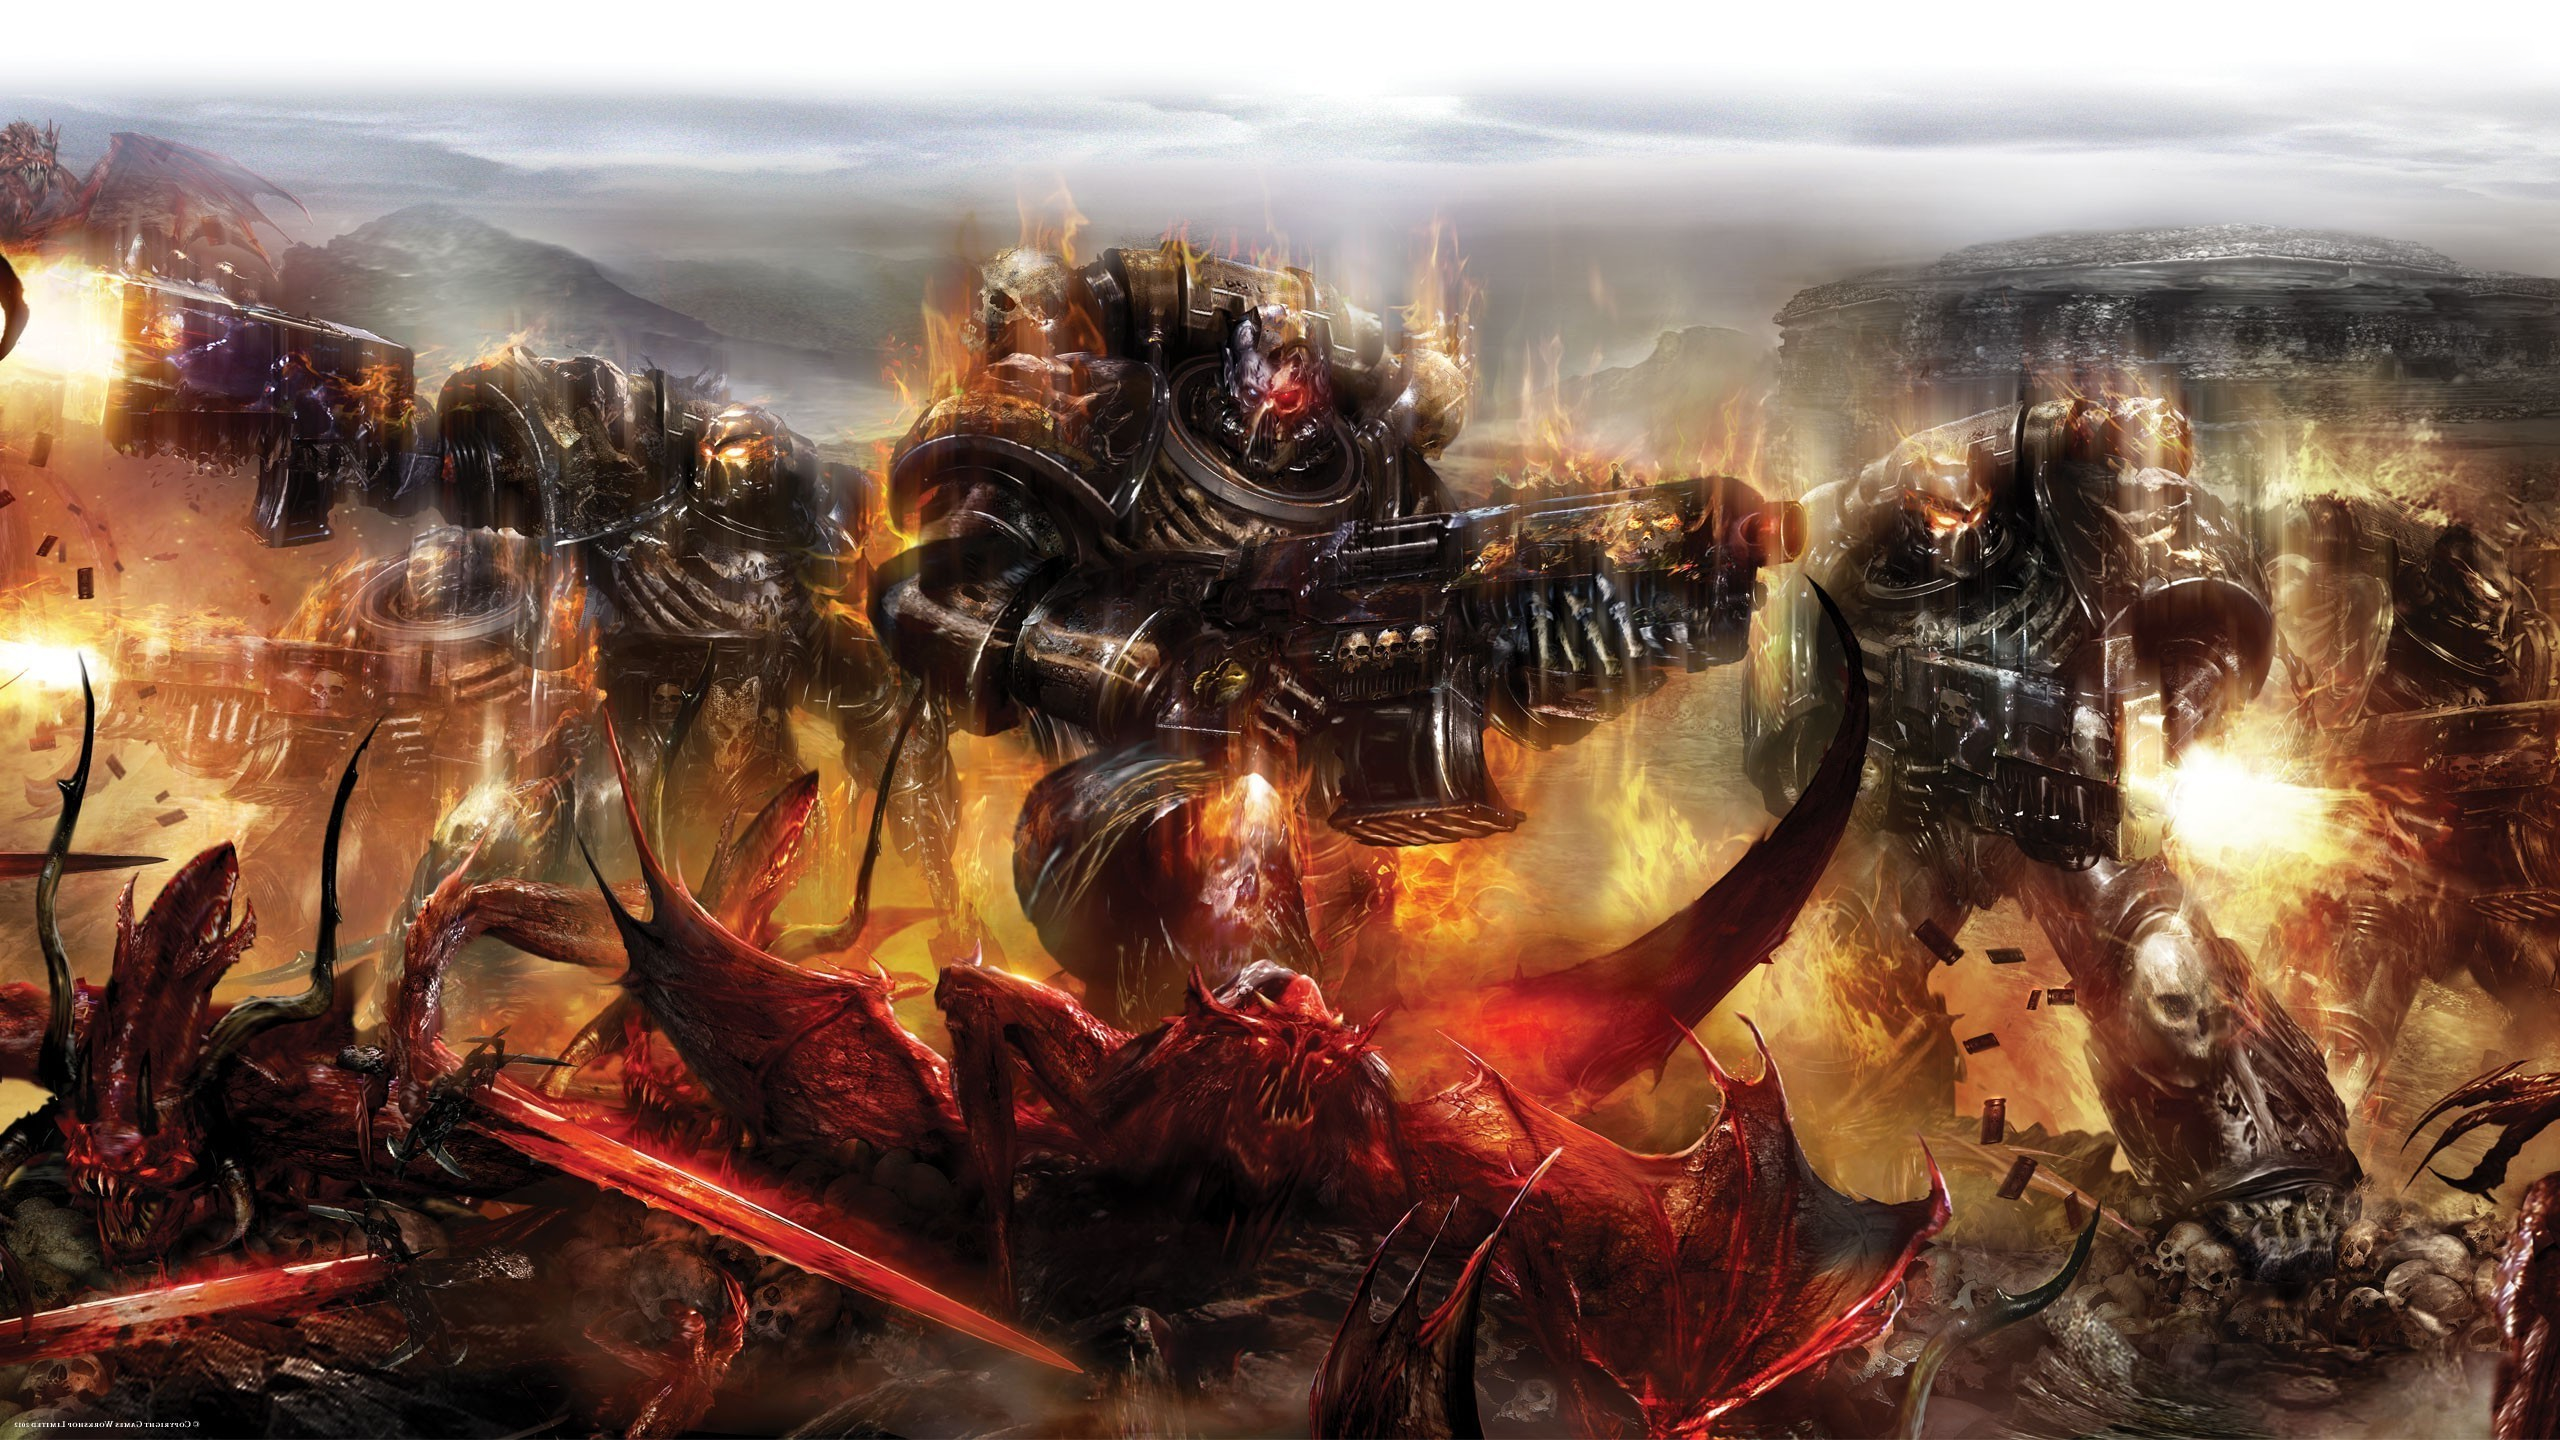  Warhammer HQ Background Wallpapers